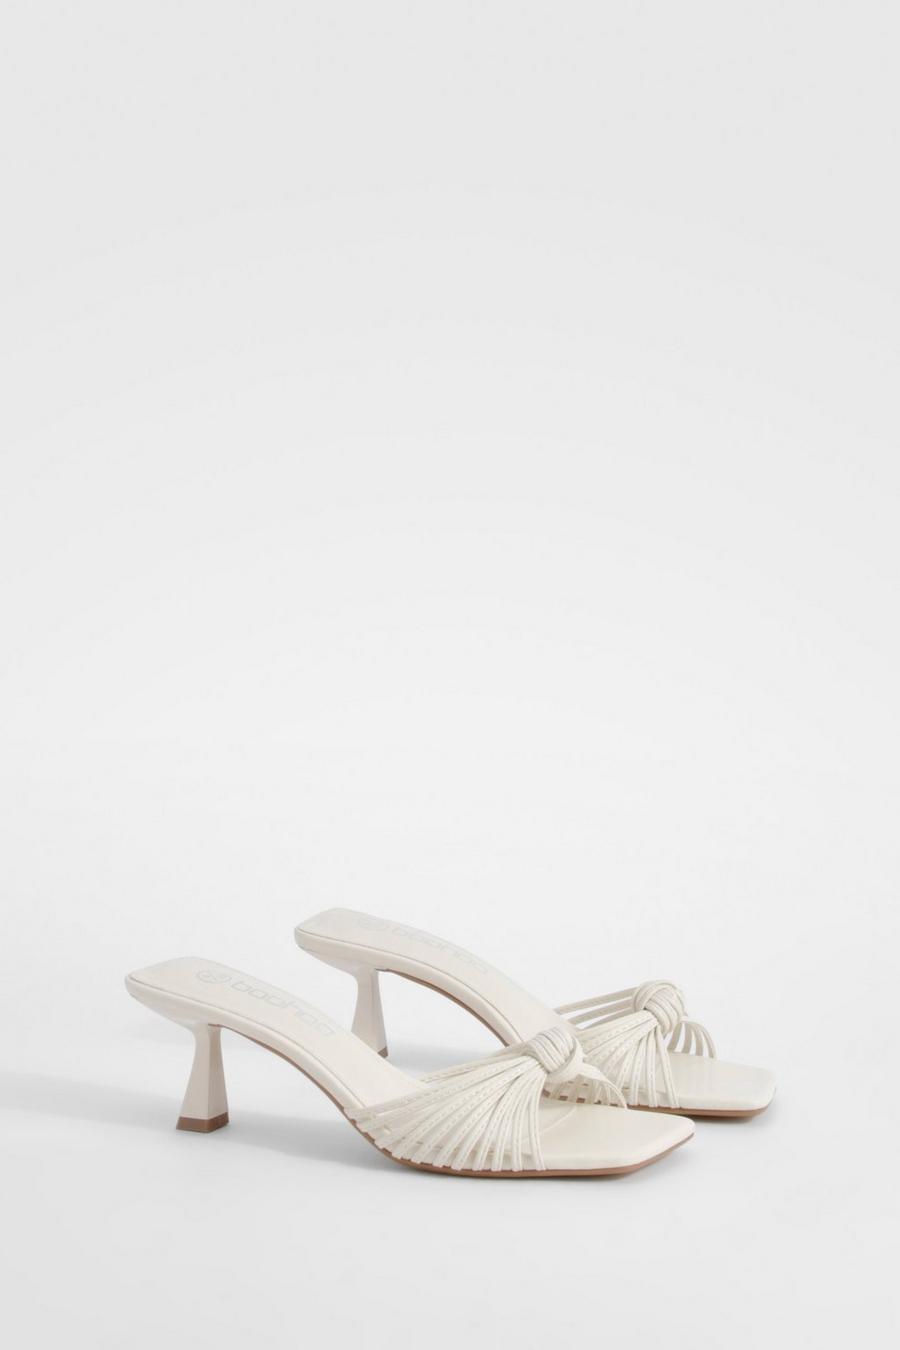 Cream Knot Front Heeled Mules    